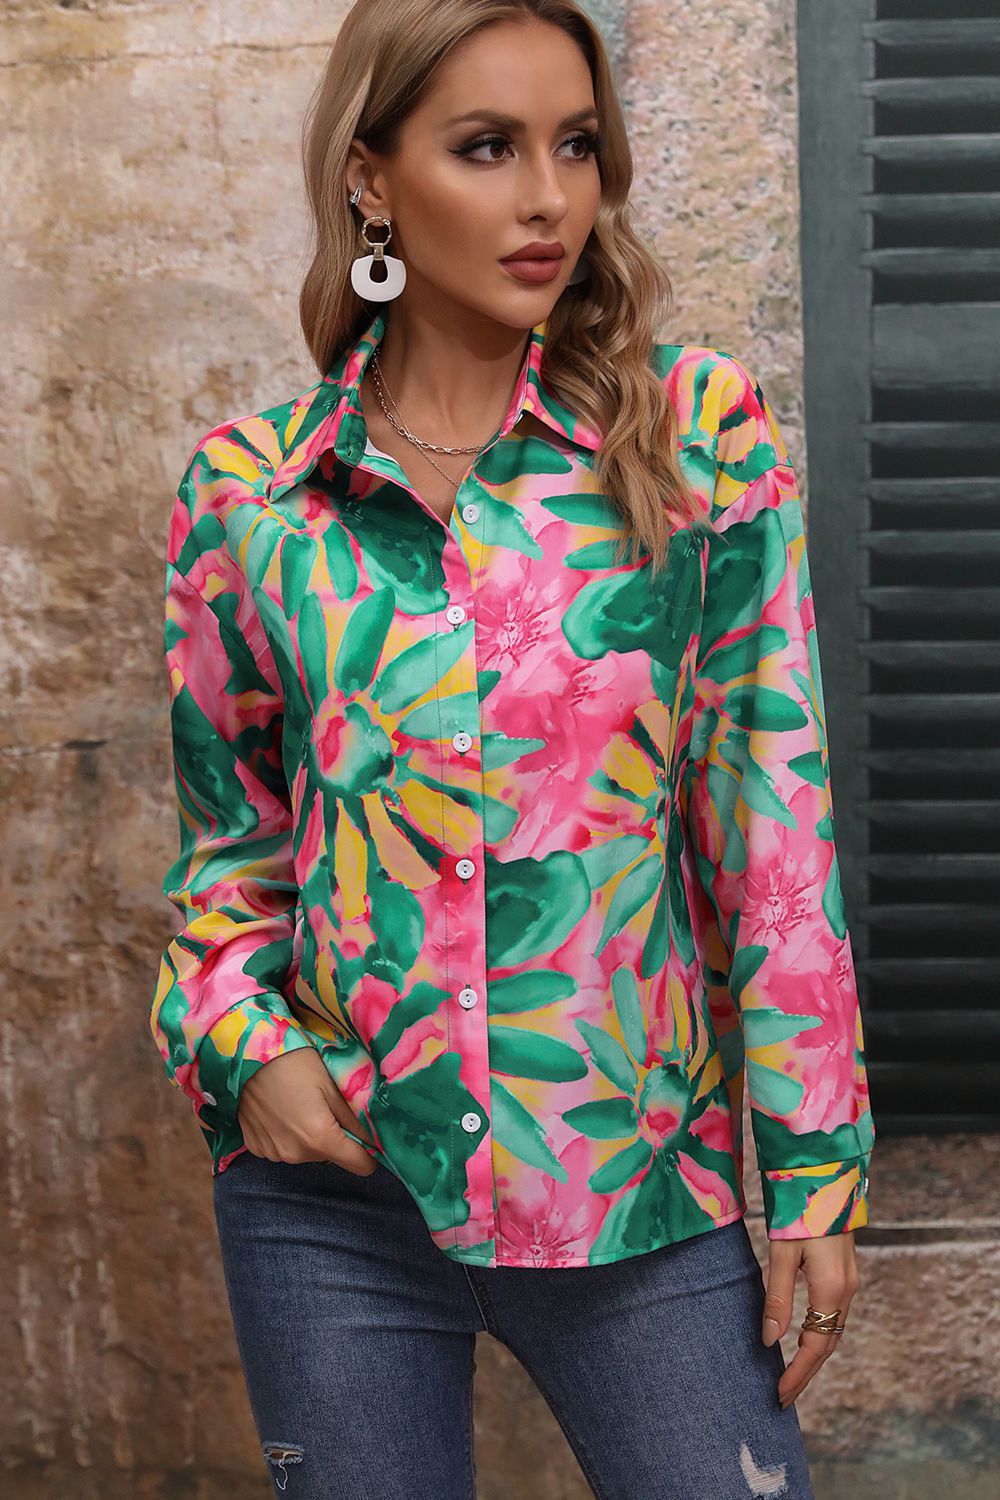 Floral Print Collared Neck Long Sleeve Shirt Floral